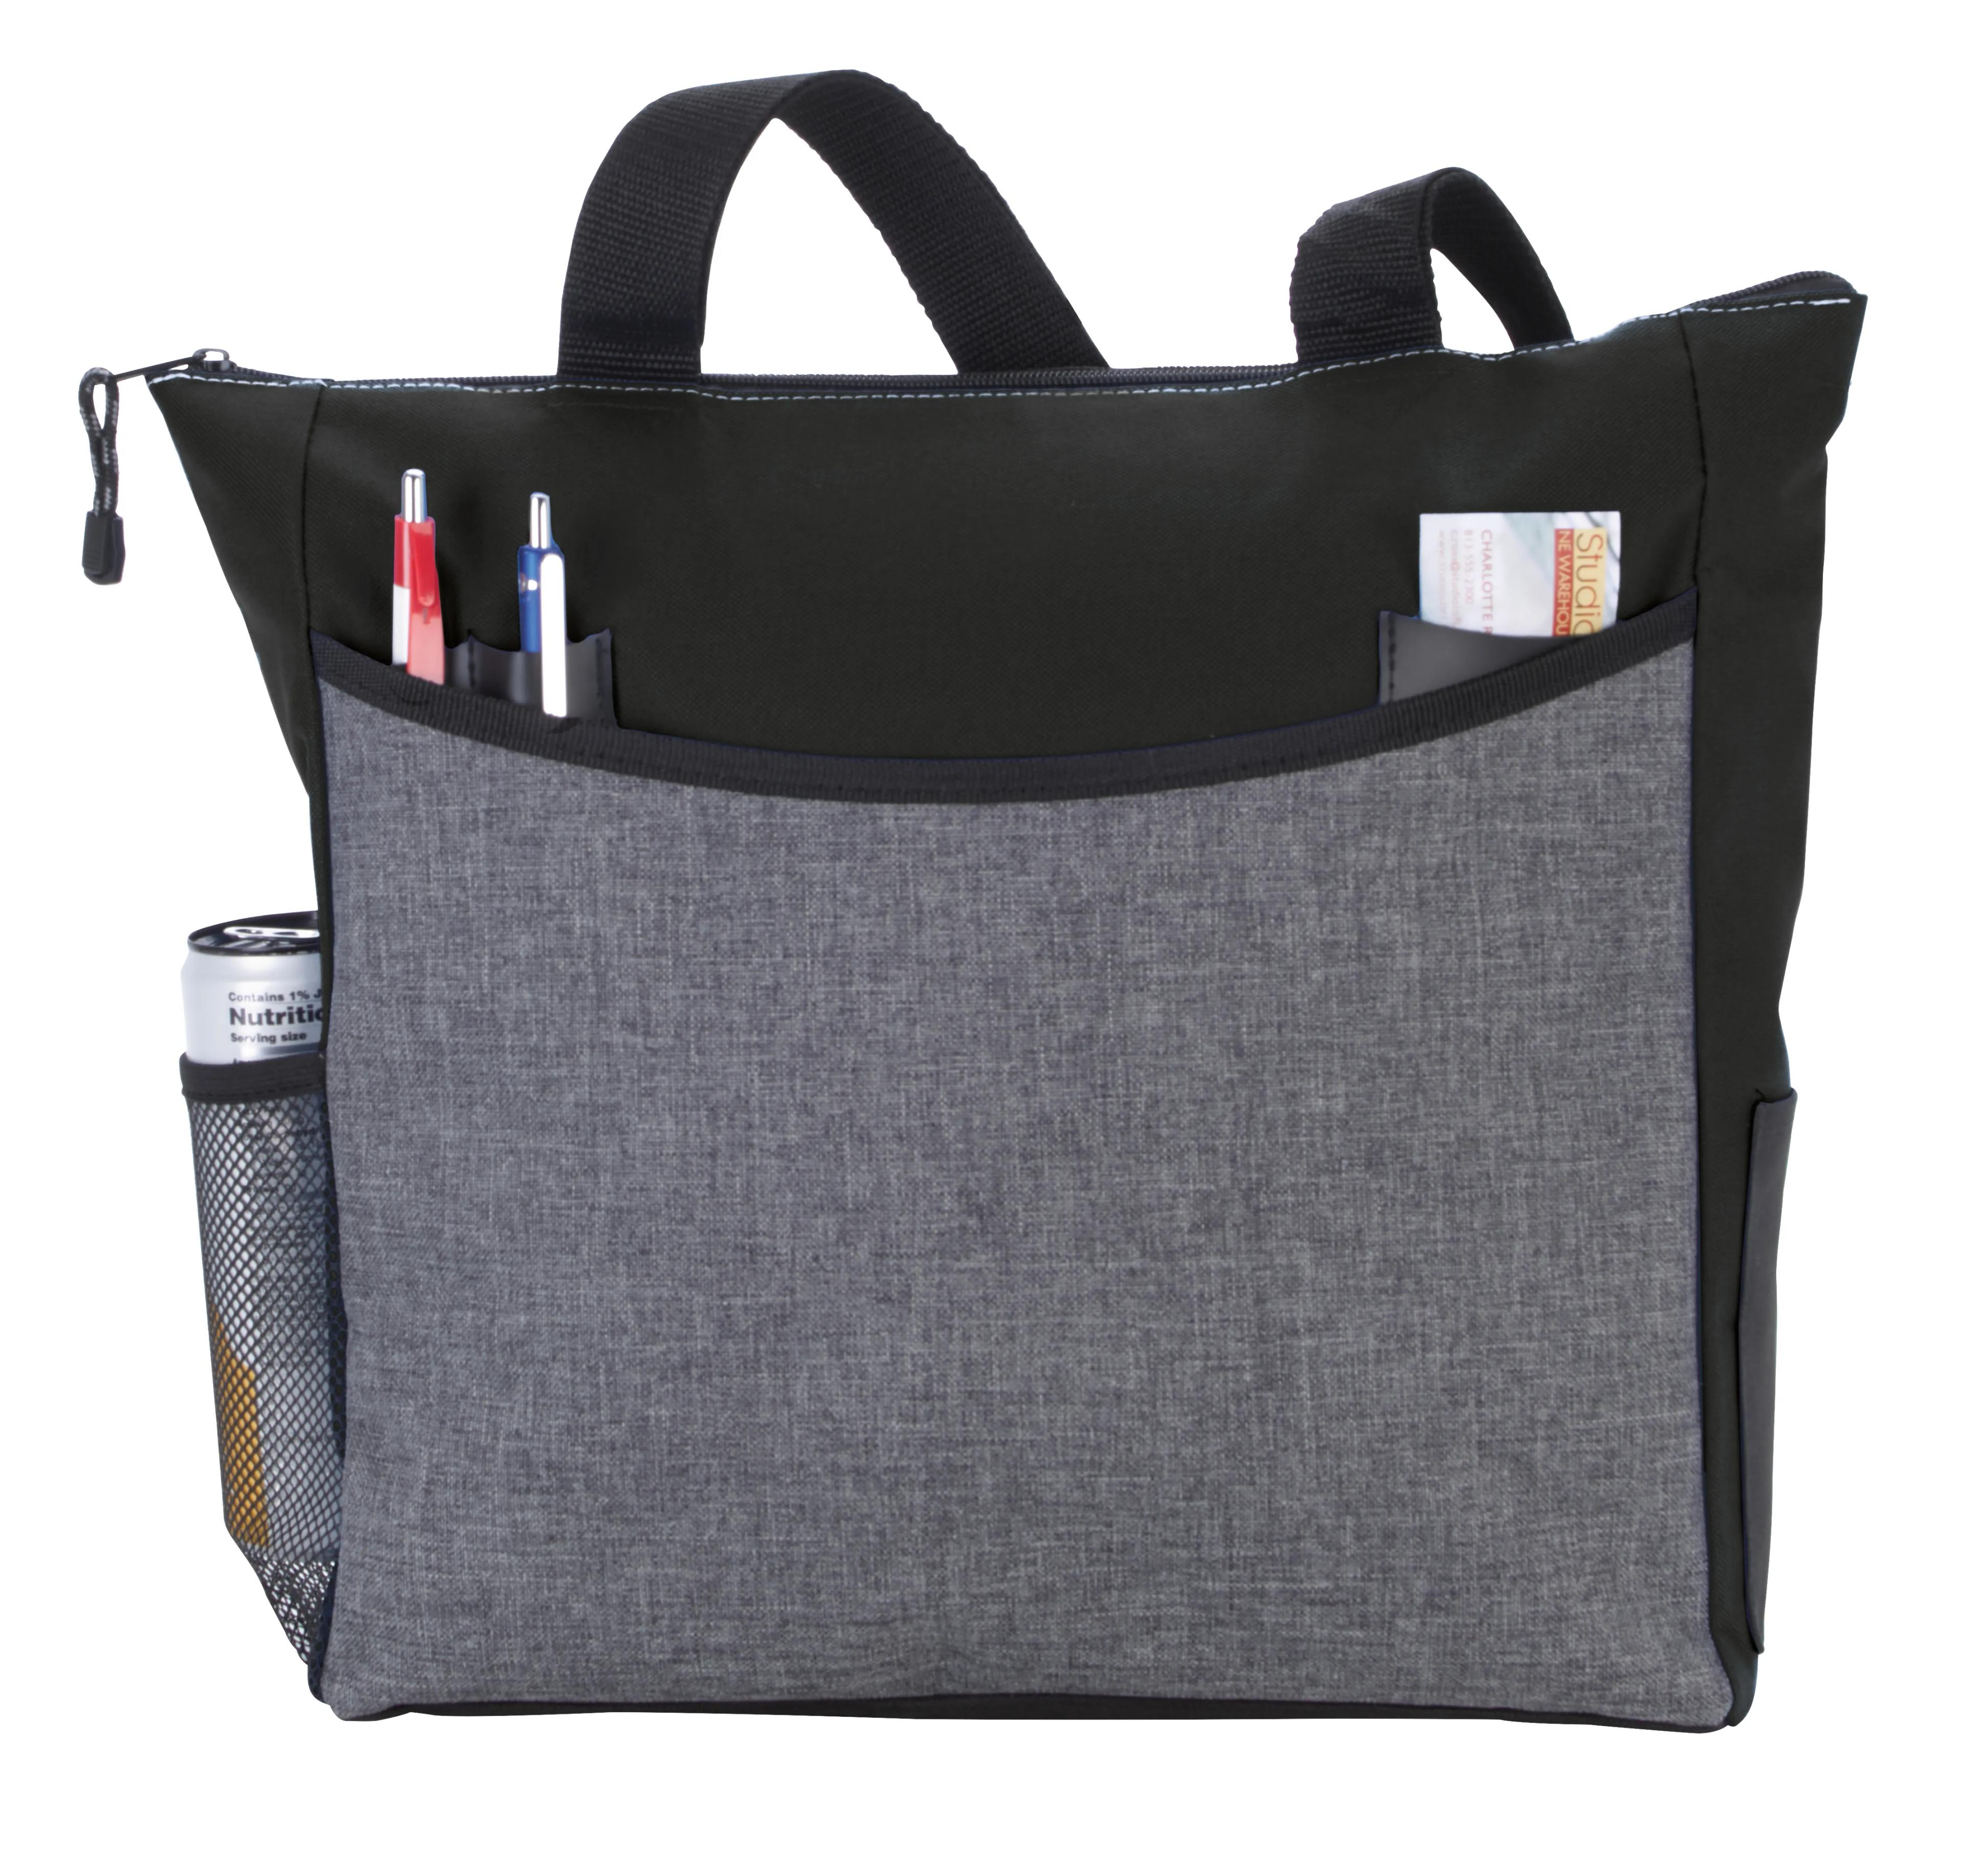 Two-Tone TranSport It Tote 14 of 29